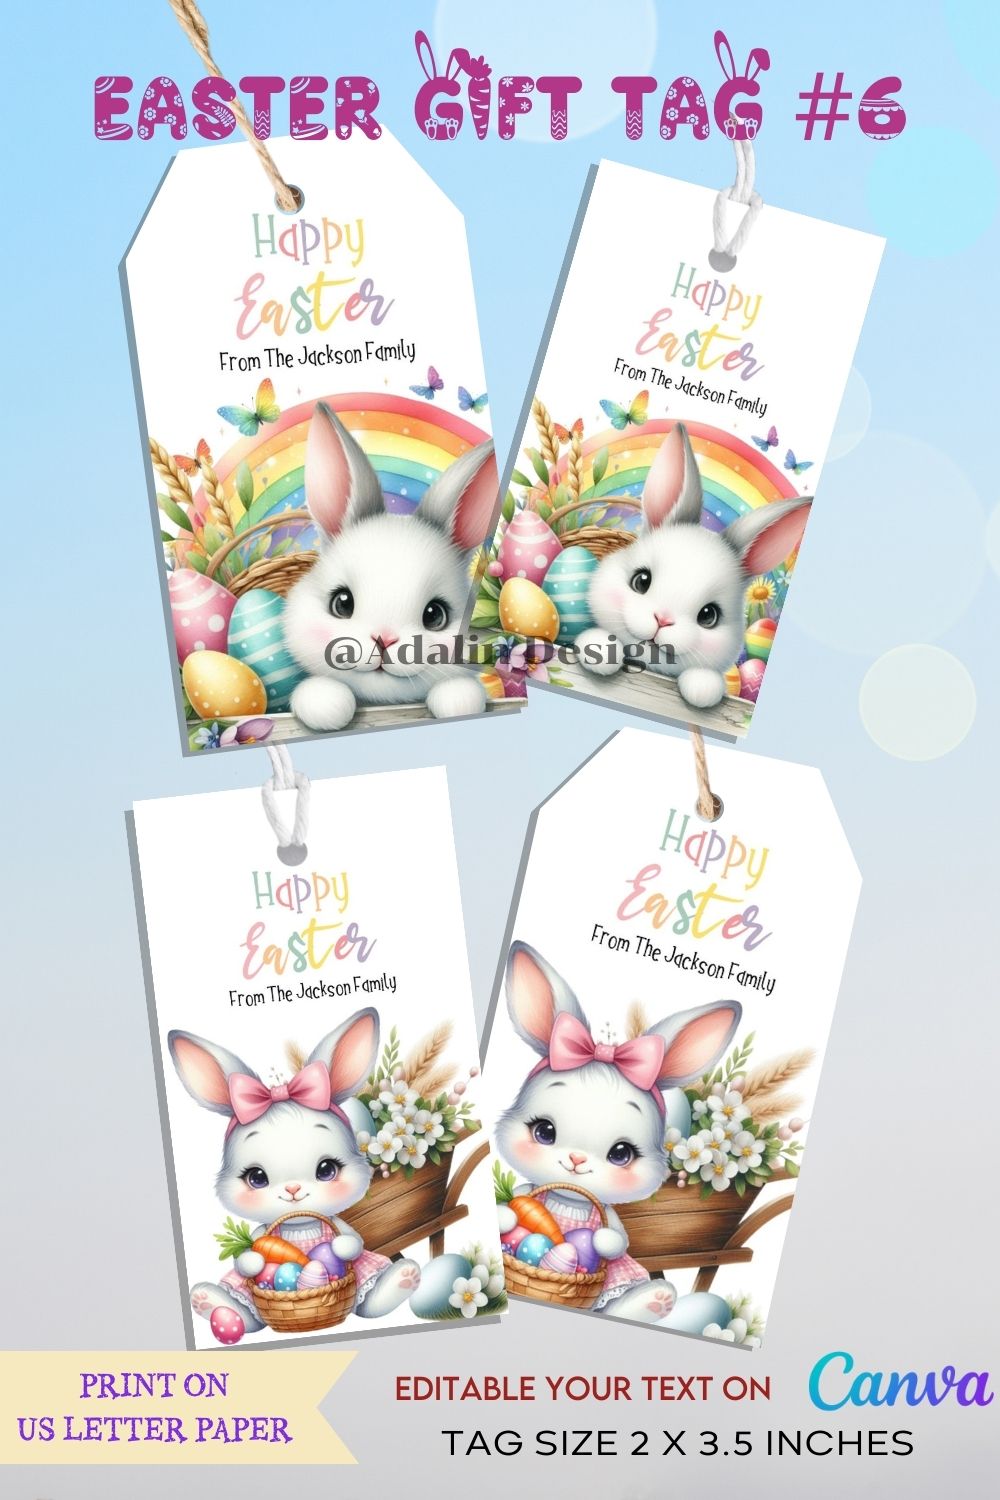 Easter Gift Tags #6 pinterest preview image.